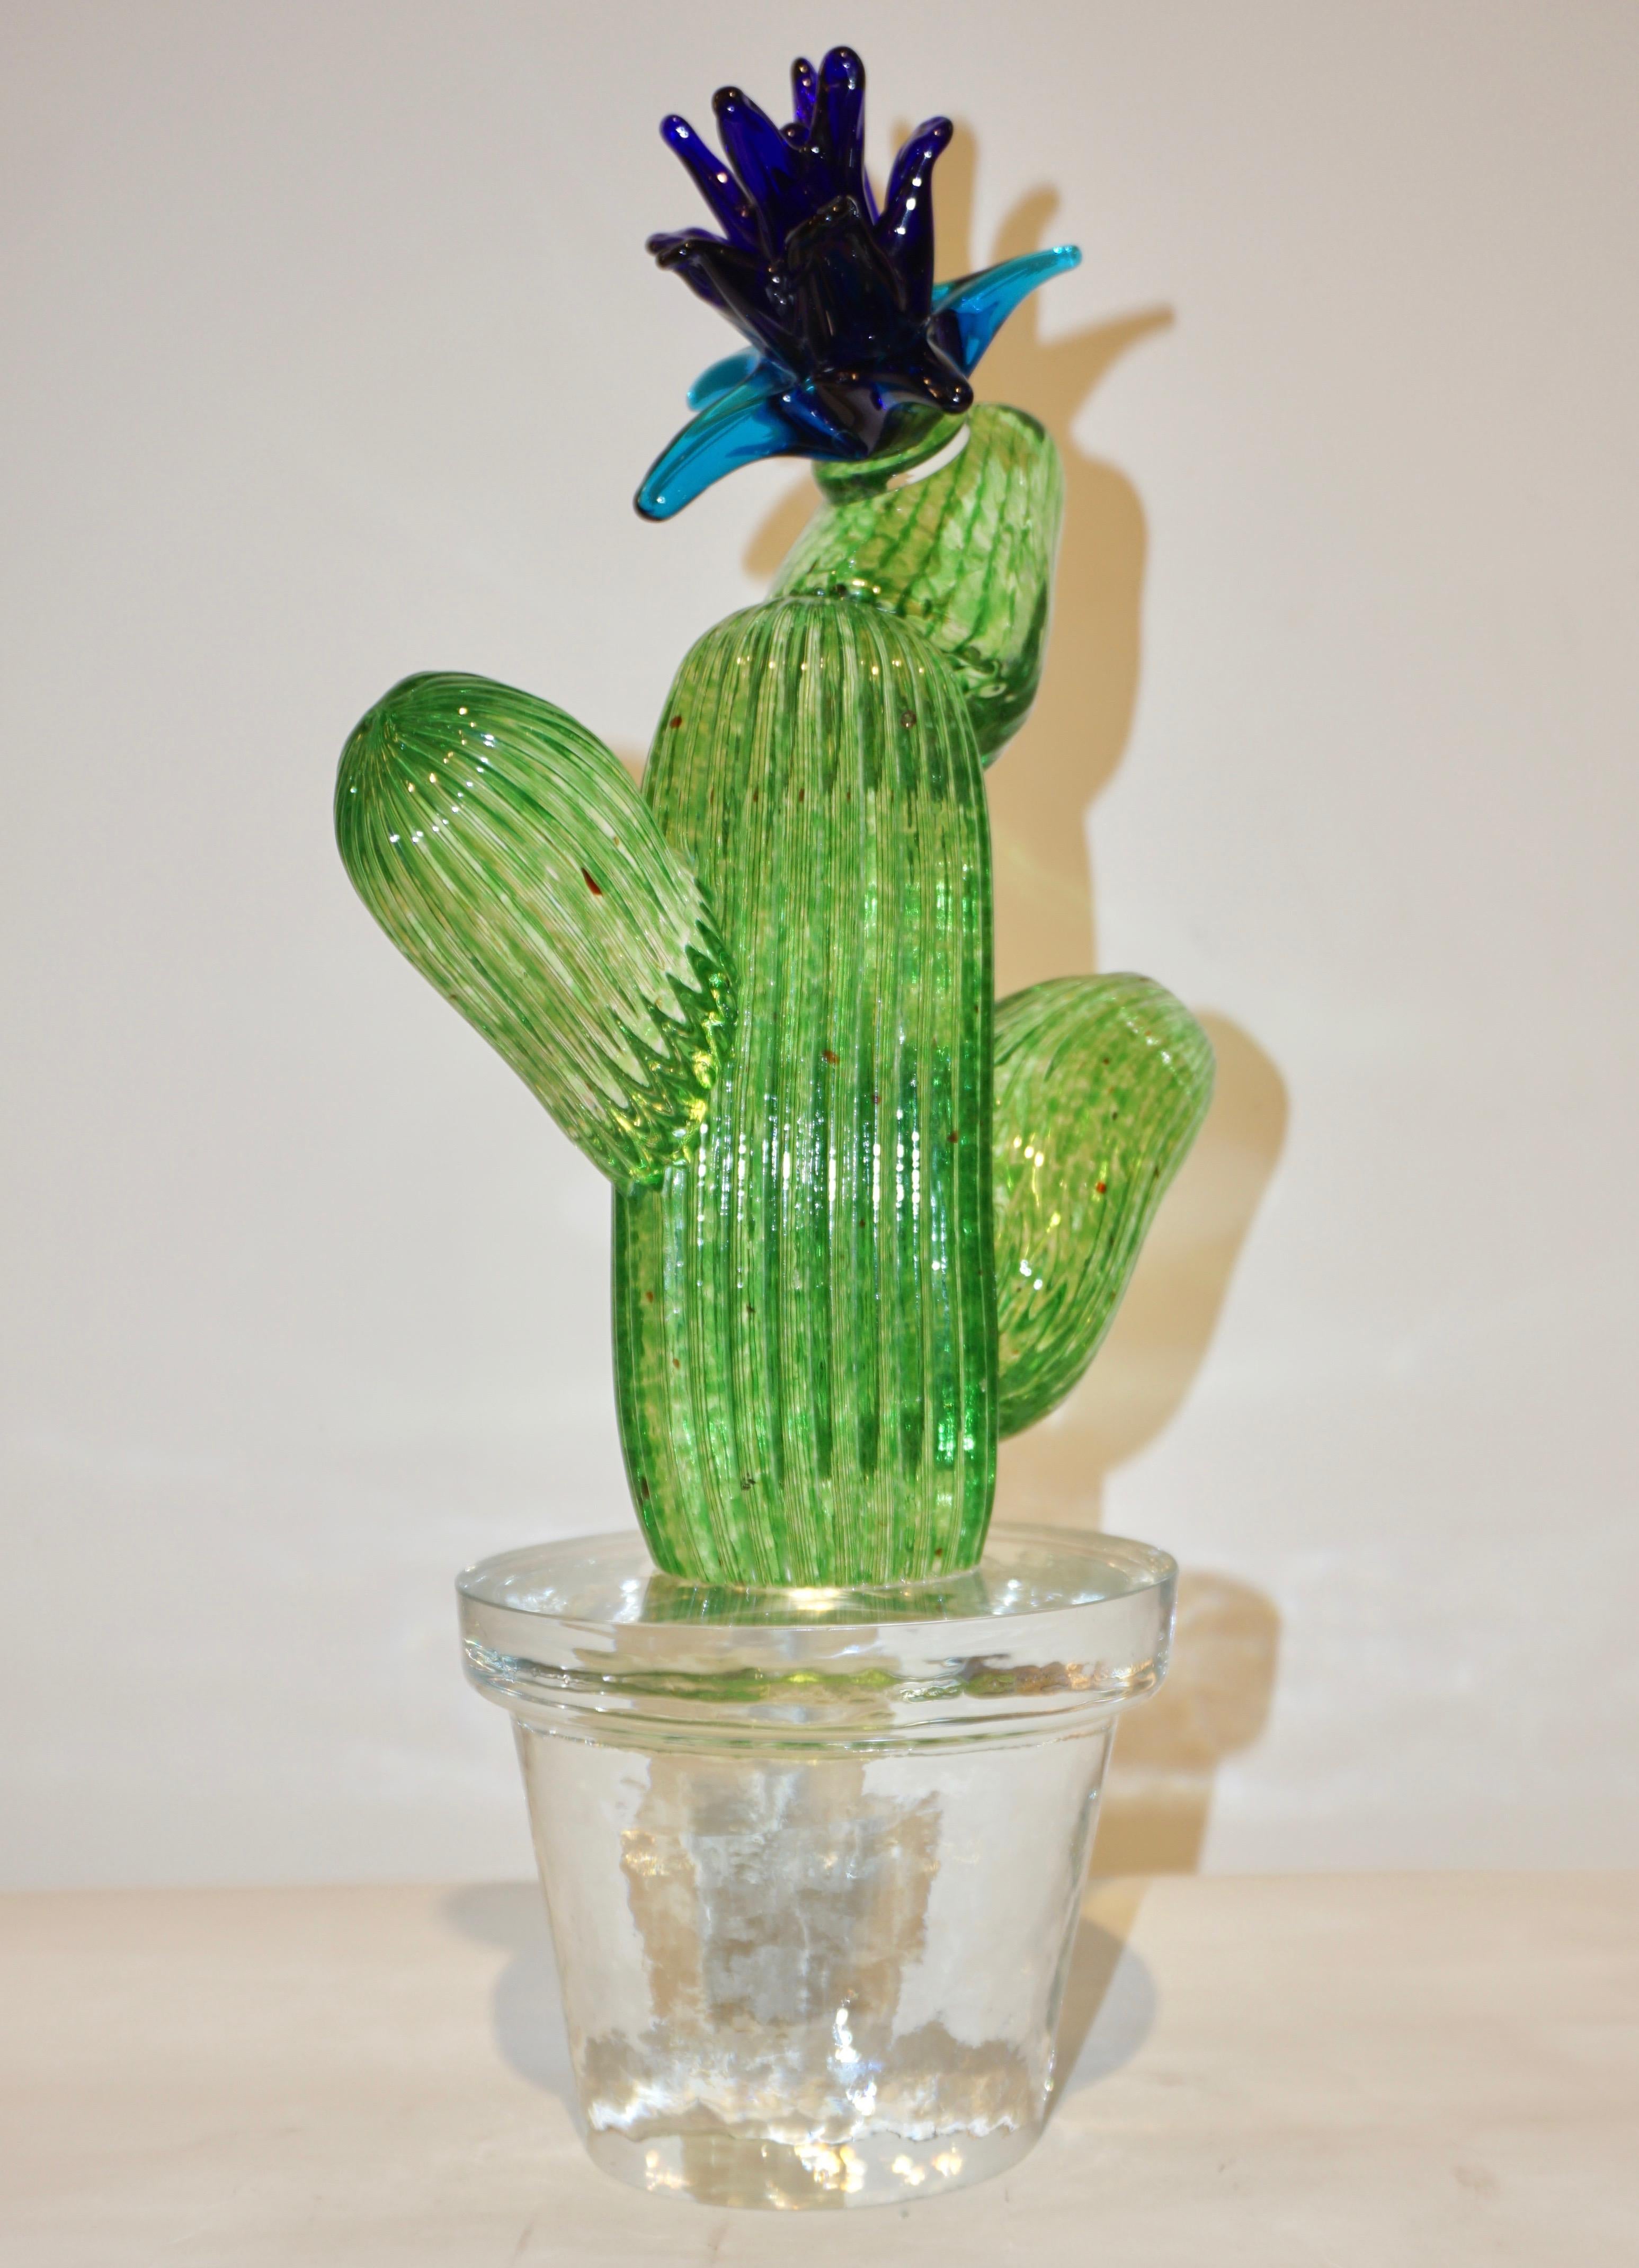 Hand-Crafted Formia Marta Marzotto Vintage Limited Edition Murano Glass Blue Cactus Plant